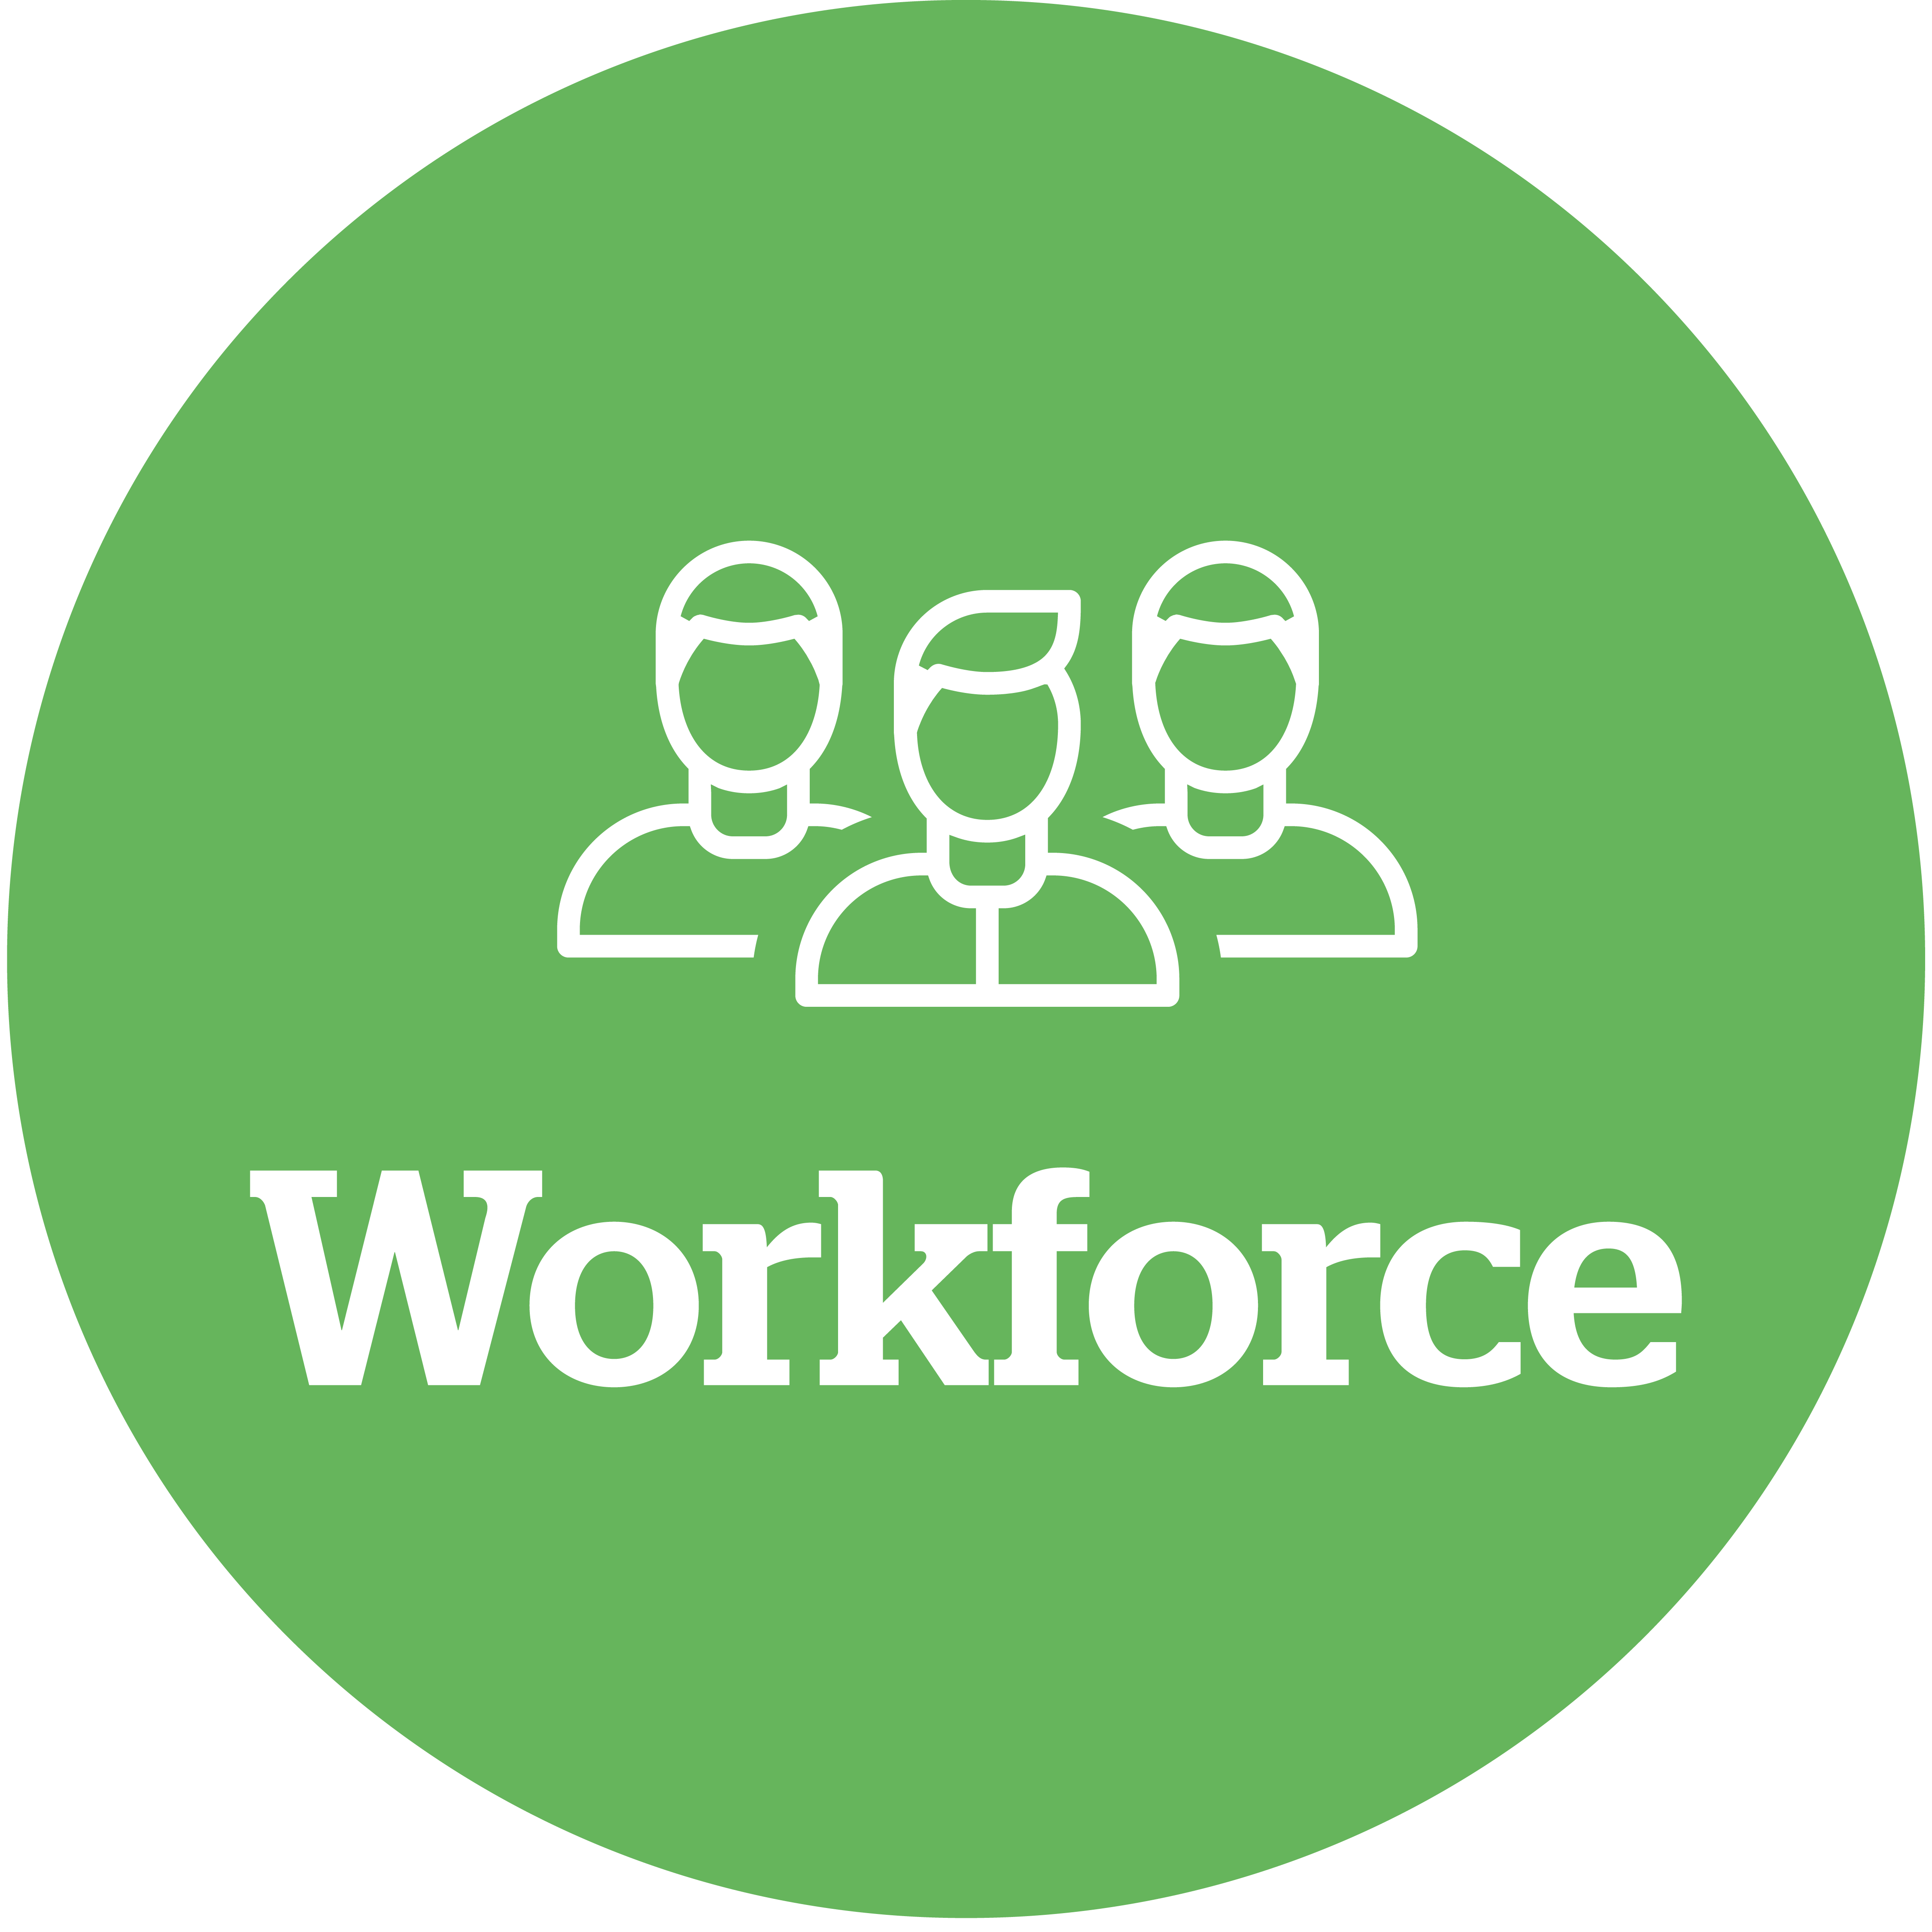 Icon saying 'workforce' with line drawing of three people